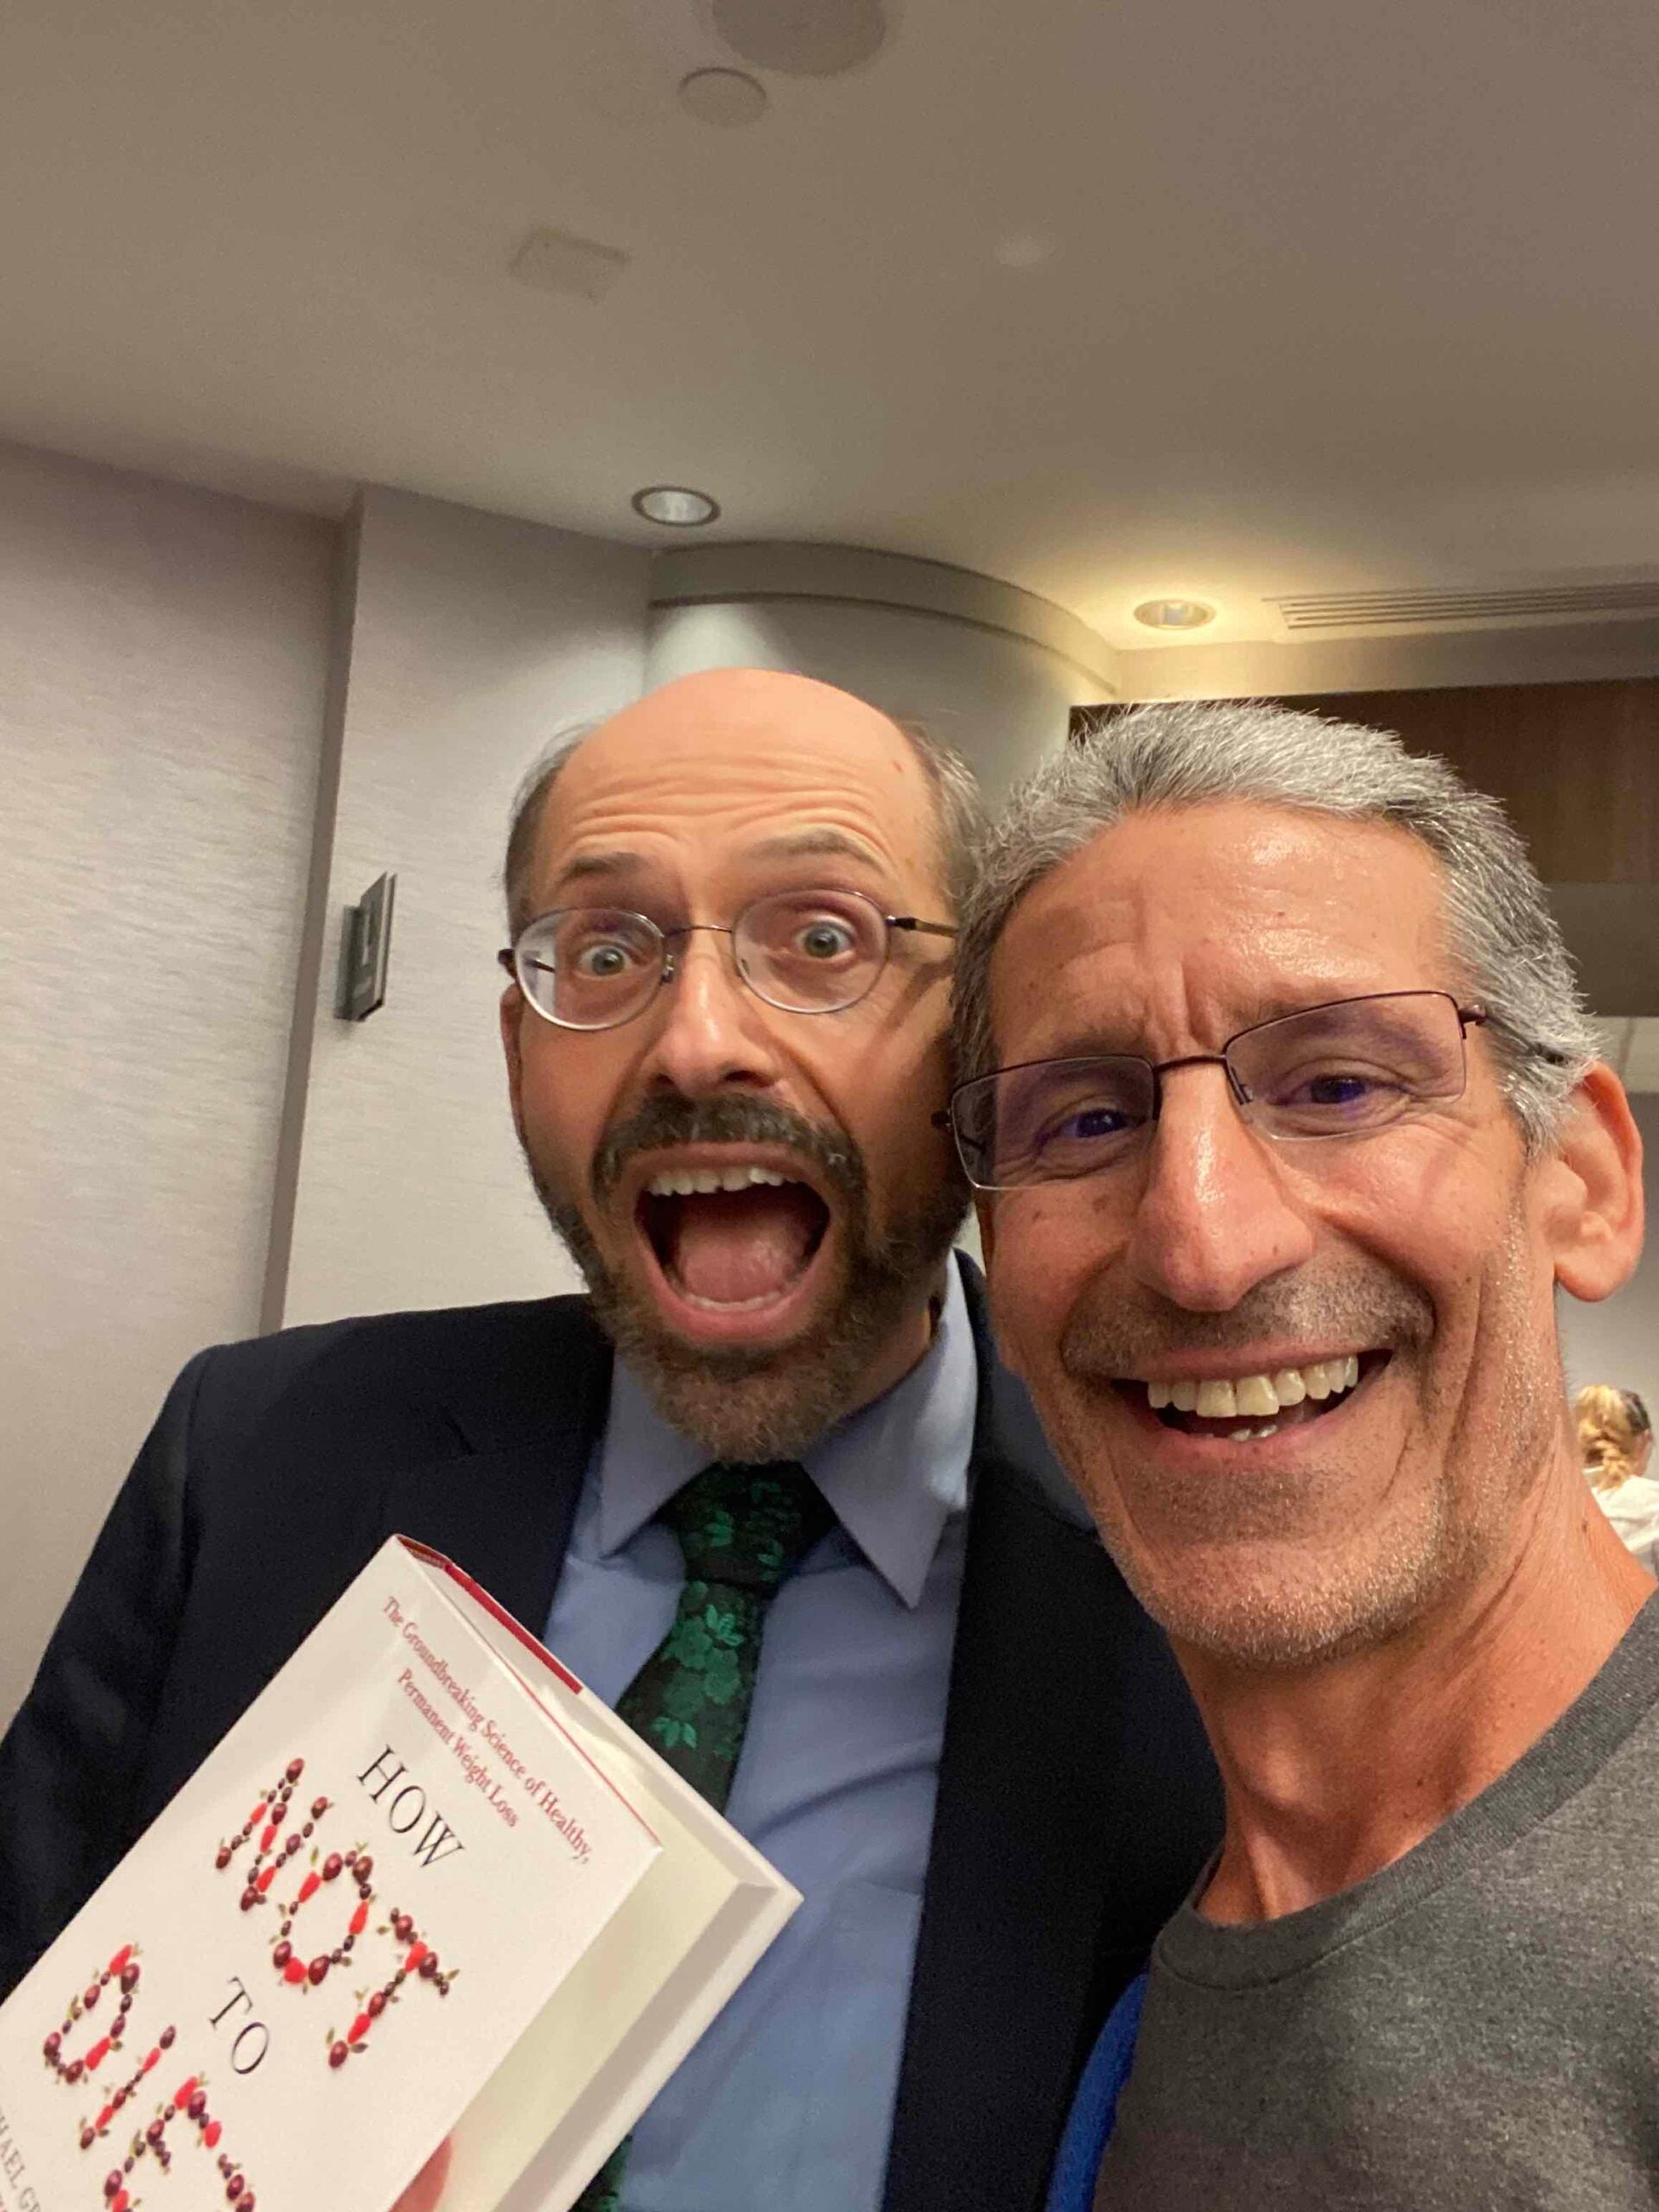 Dr. Michael Greger poses with plant-based fan Rich Ferrandino while holding a copy of his book How Not to Diet